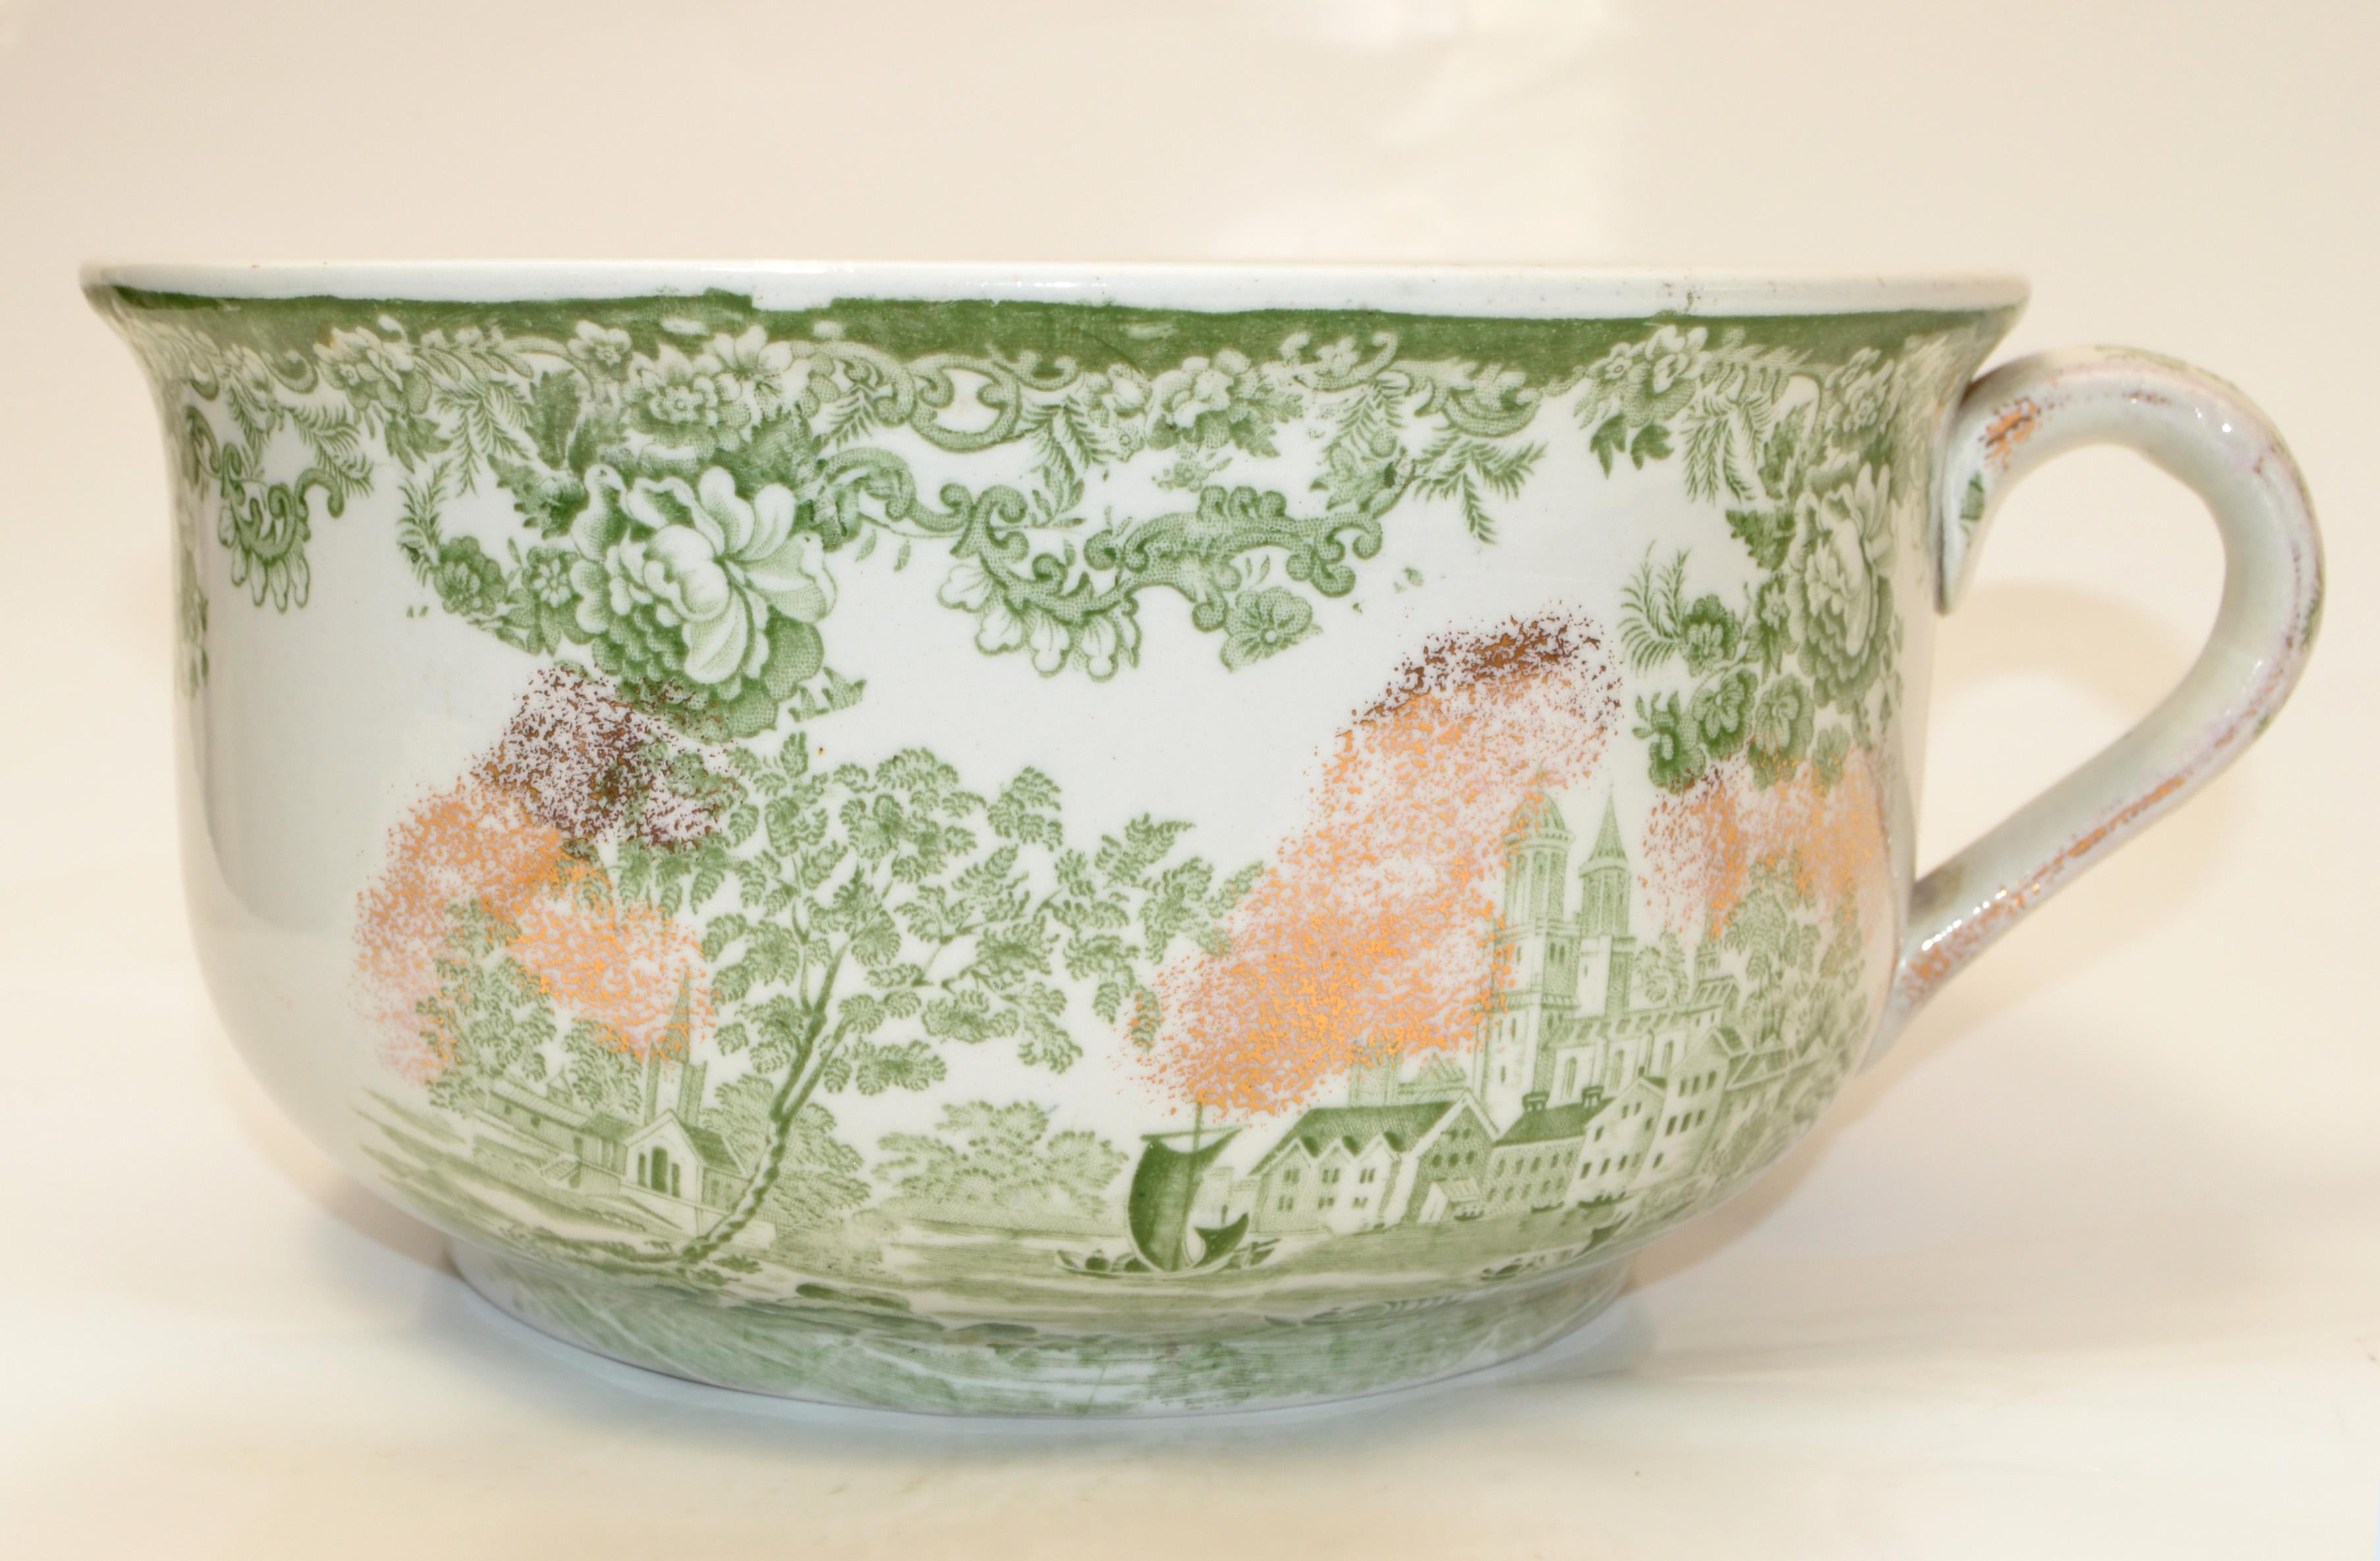 chamber pot with lid